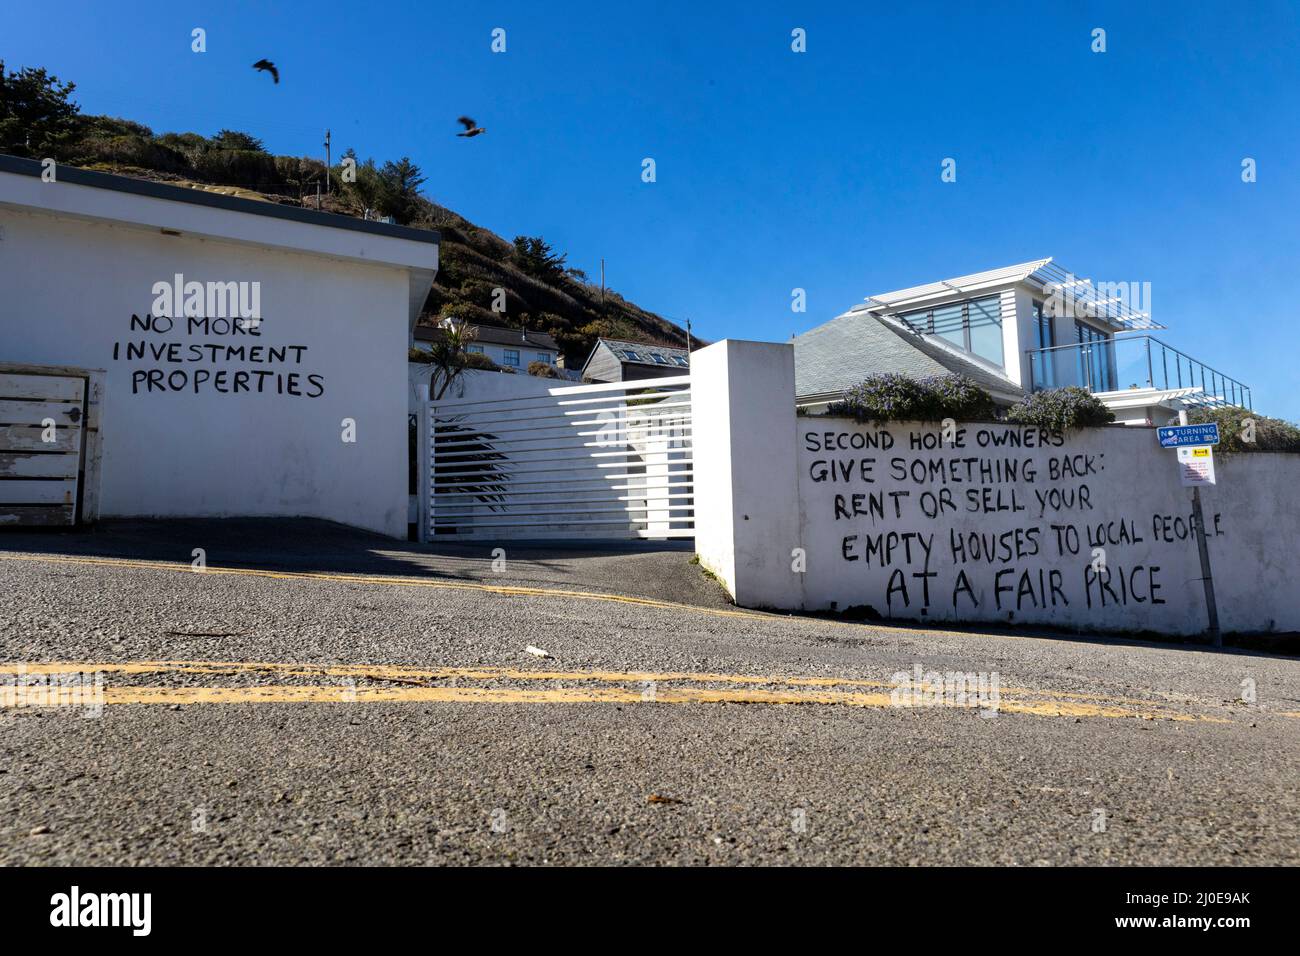 Cornish Resistance to second-home ownership, St Agnes. Suspected Second home plastered with anti-second home message during the Cornish housing crisis Stock Photo